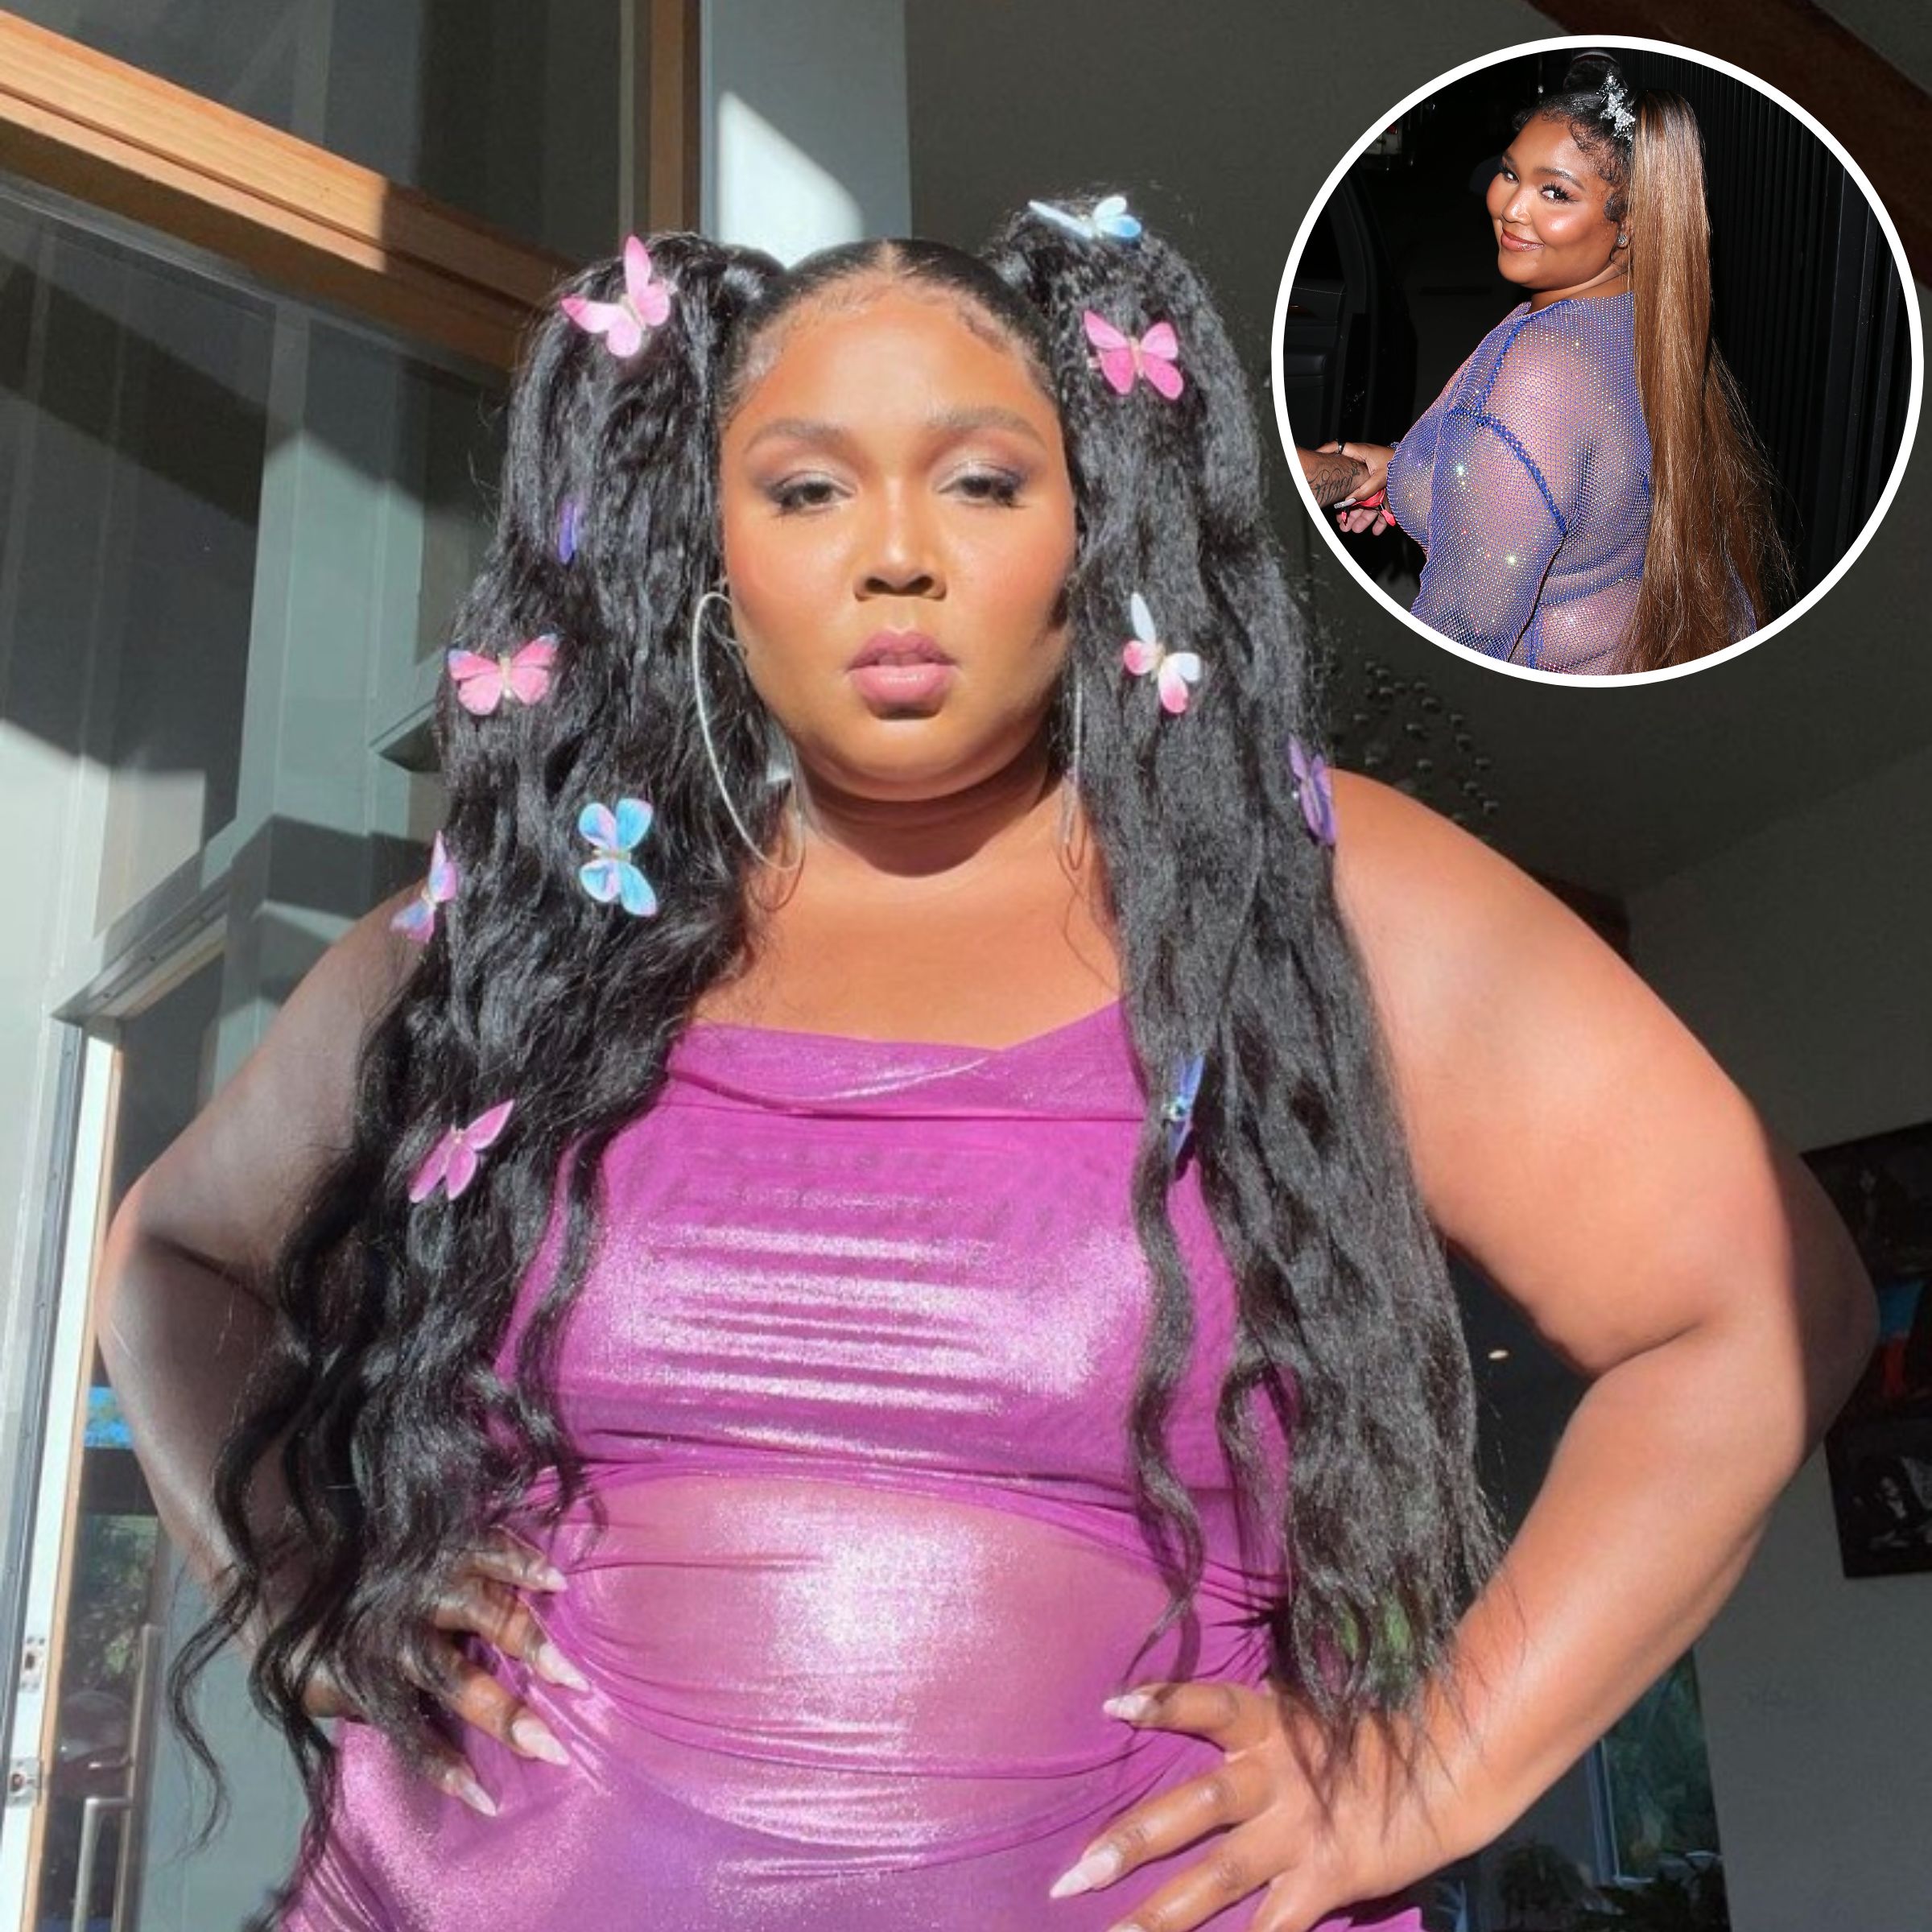 https://www.lifeandstylemag.com/wp-content/uploads/2022/07/lizzo-sheer-outfits-feature.jpg?fit=2400%2C2400&quality=86&strip=all